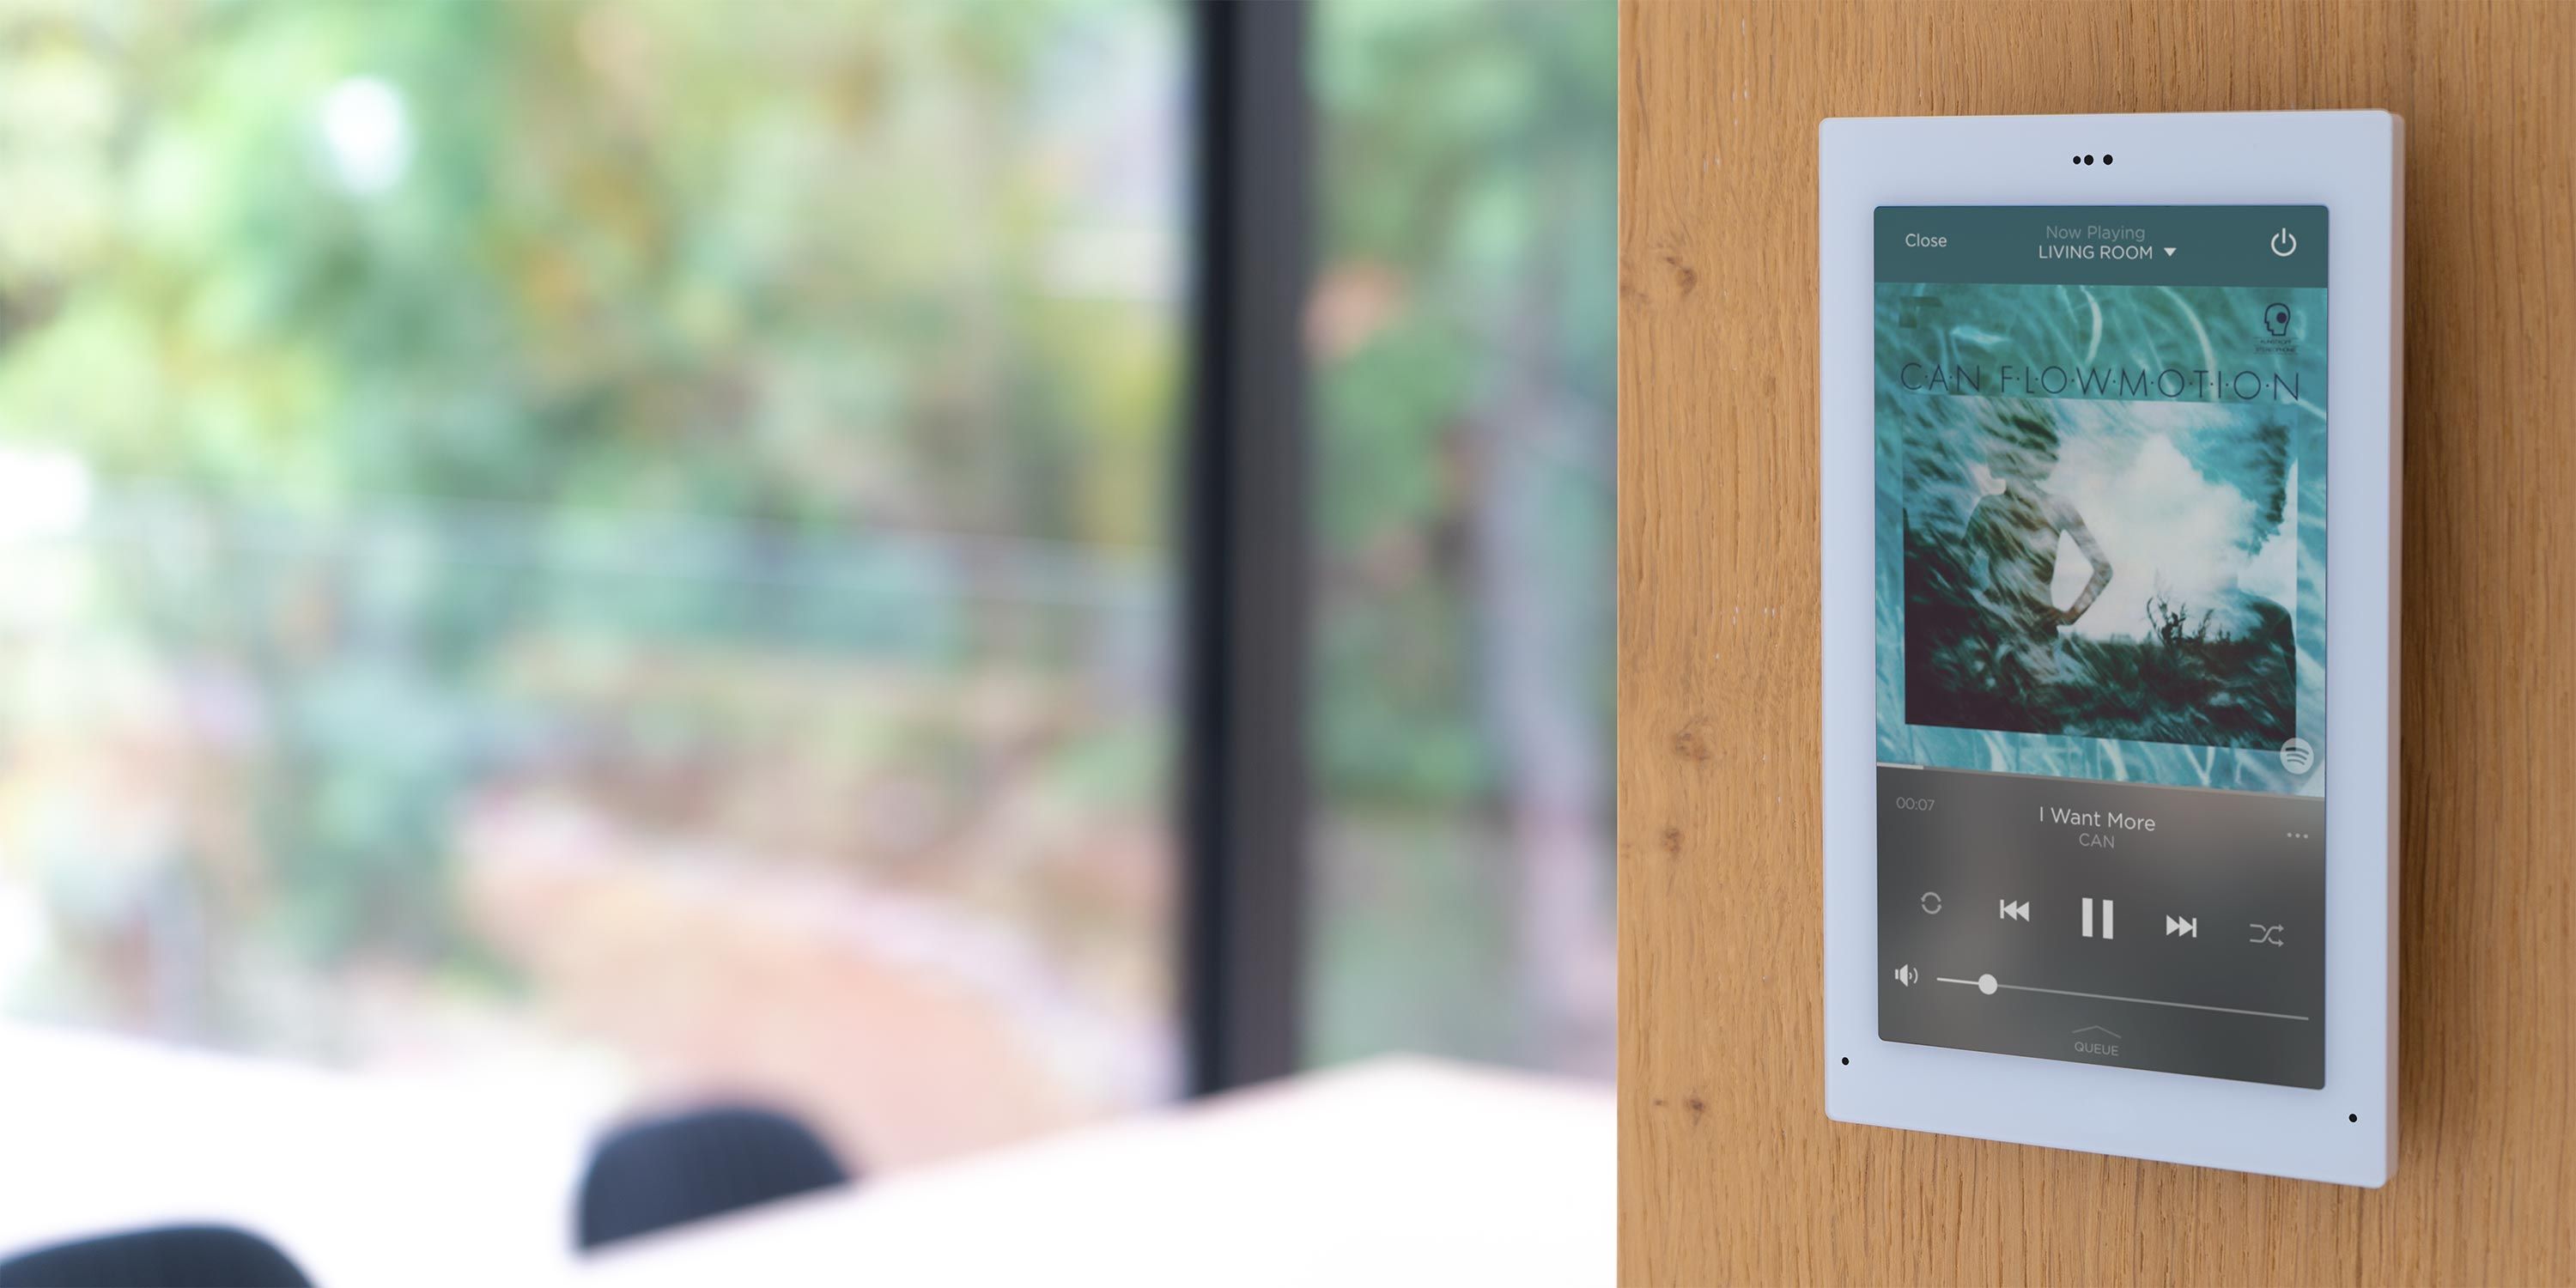 Wall-mounted touchscreen displaying music controls and album art in a bright, modern home.